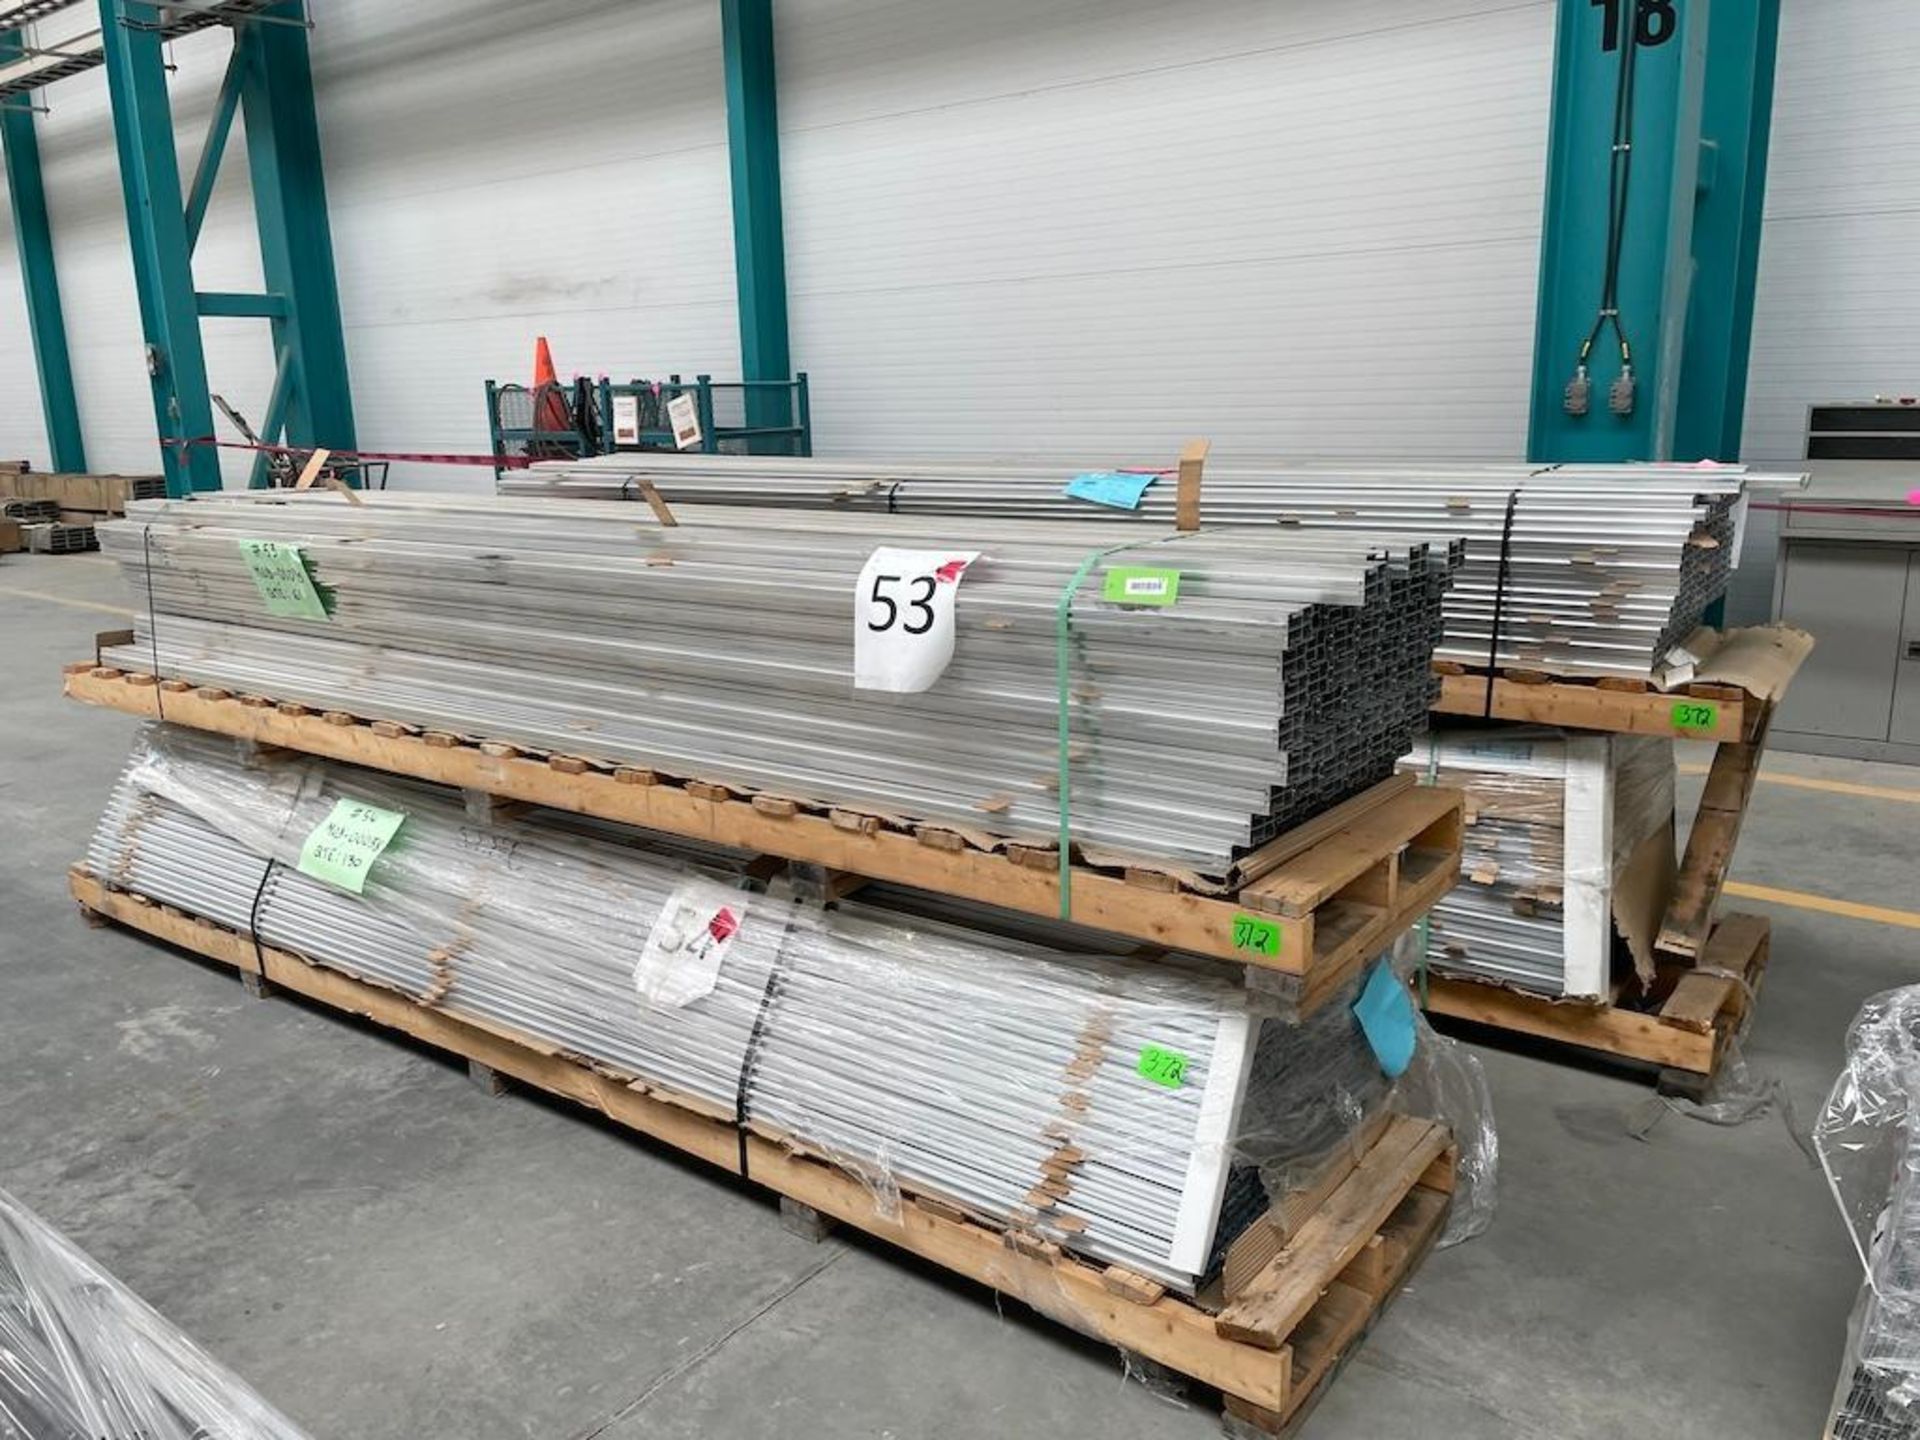 LOT (26) SKIDS ALUMINUM EXTRUSIONS, SOME SKIDS UP TO 470 KG AND 28 FT LONG [MATANE] *PLEASE NOTE, EX - Image 11 of 40